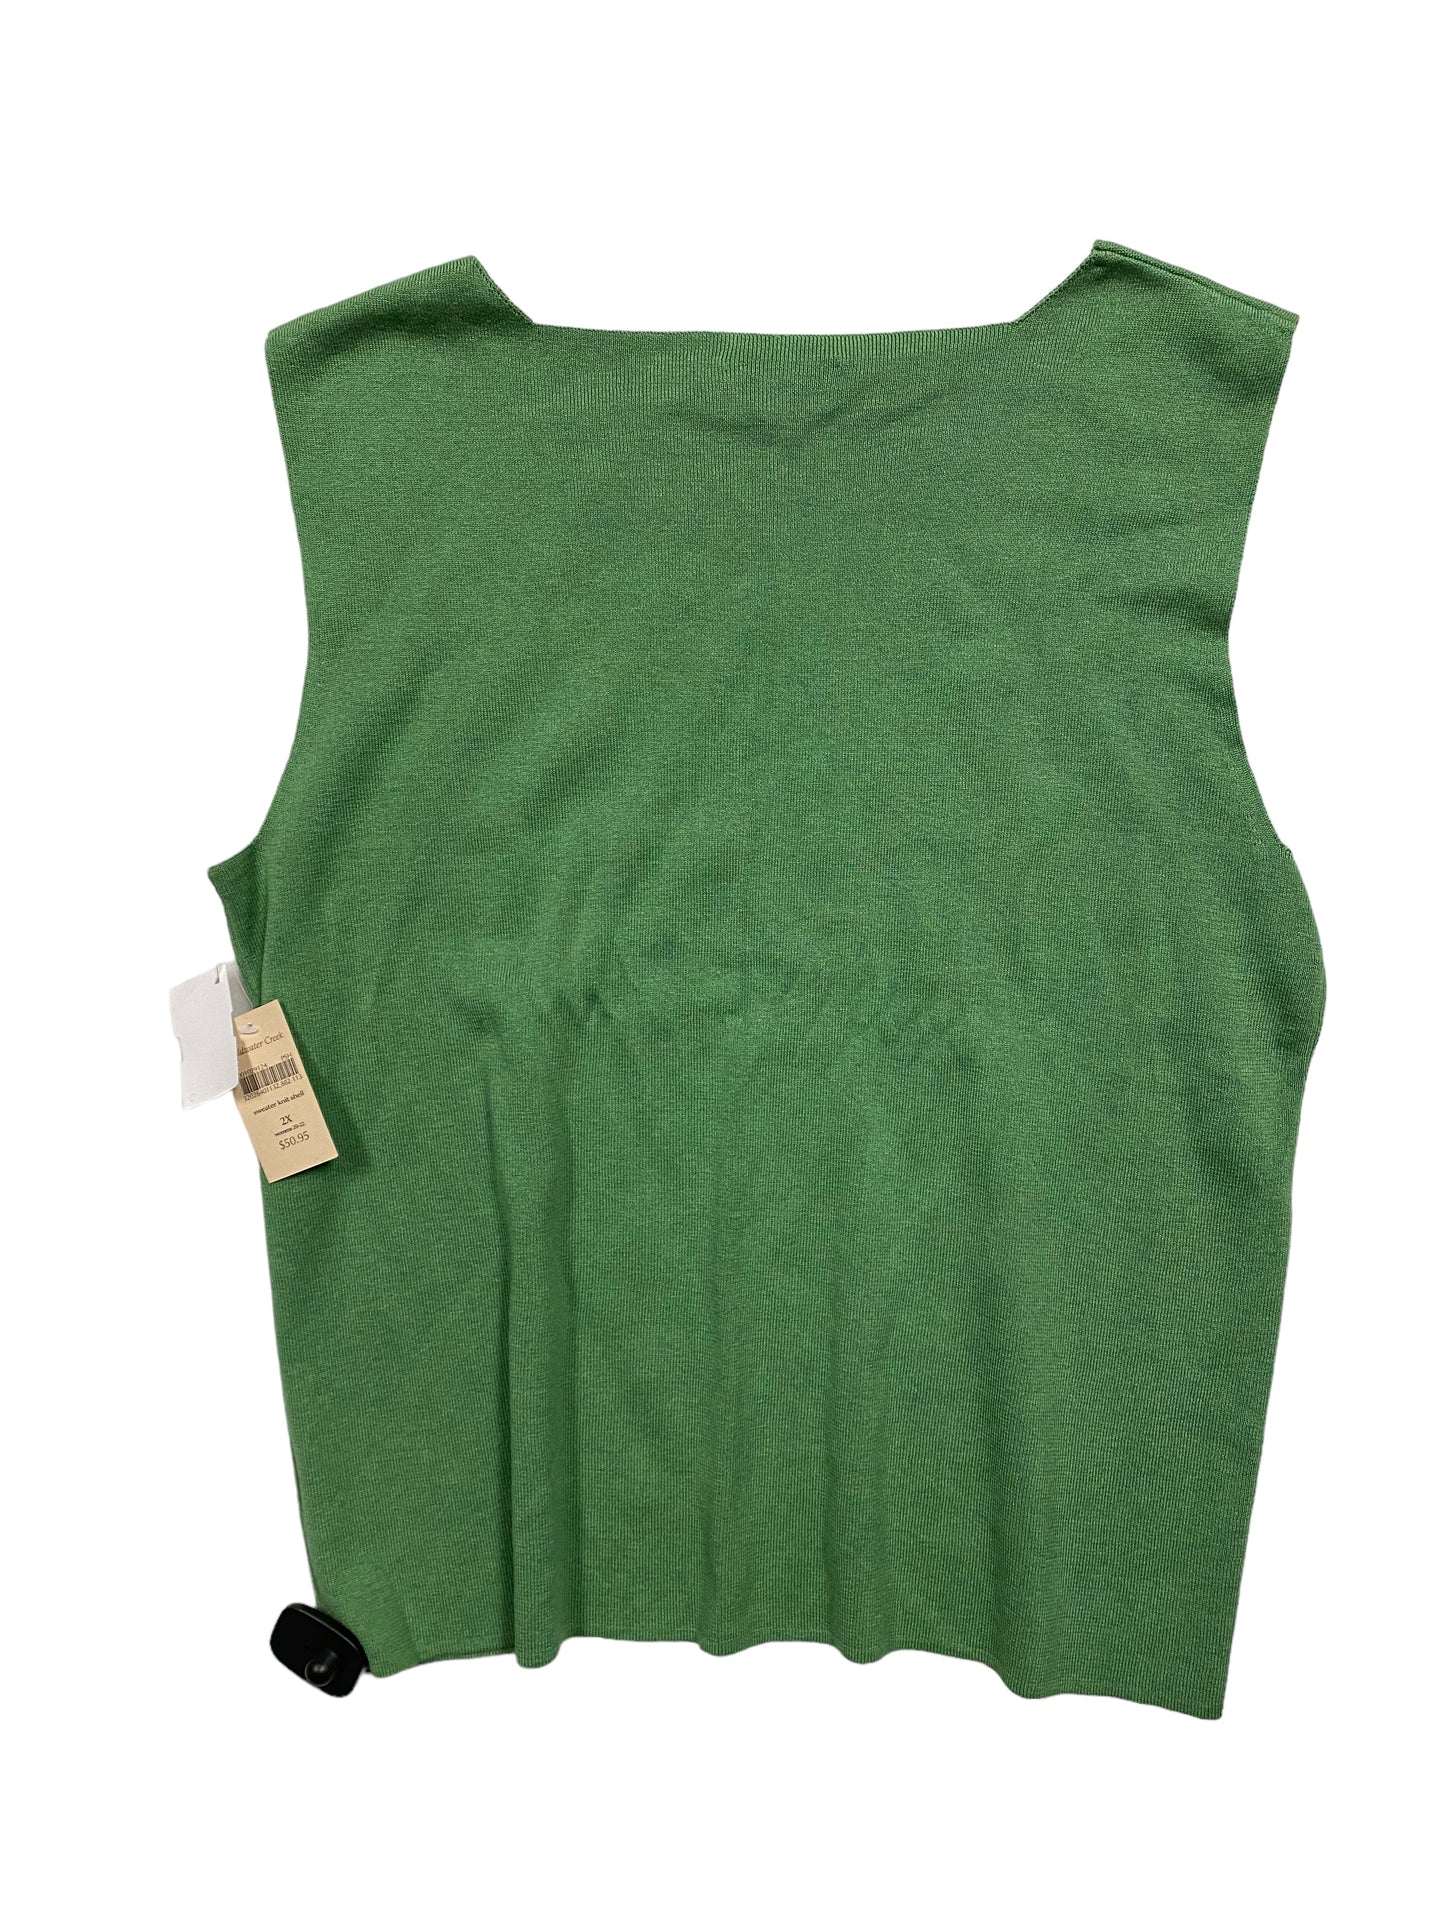 Green Top Sleeveless Coldwater Creek, Size 2x